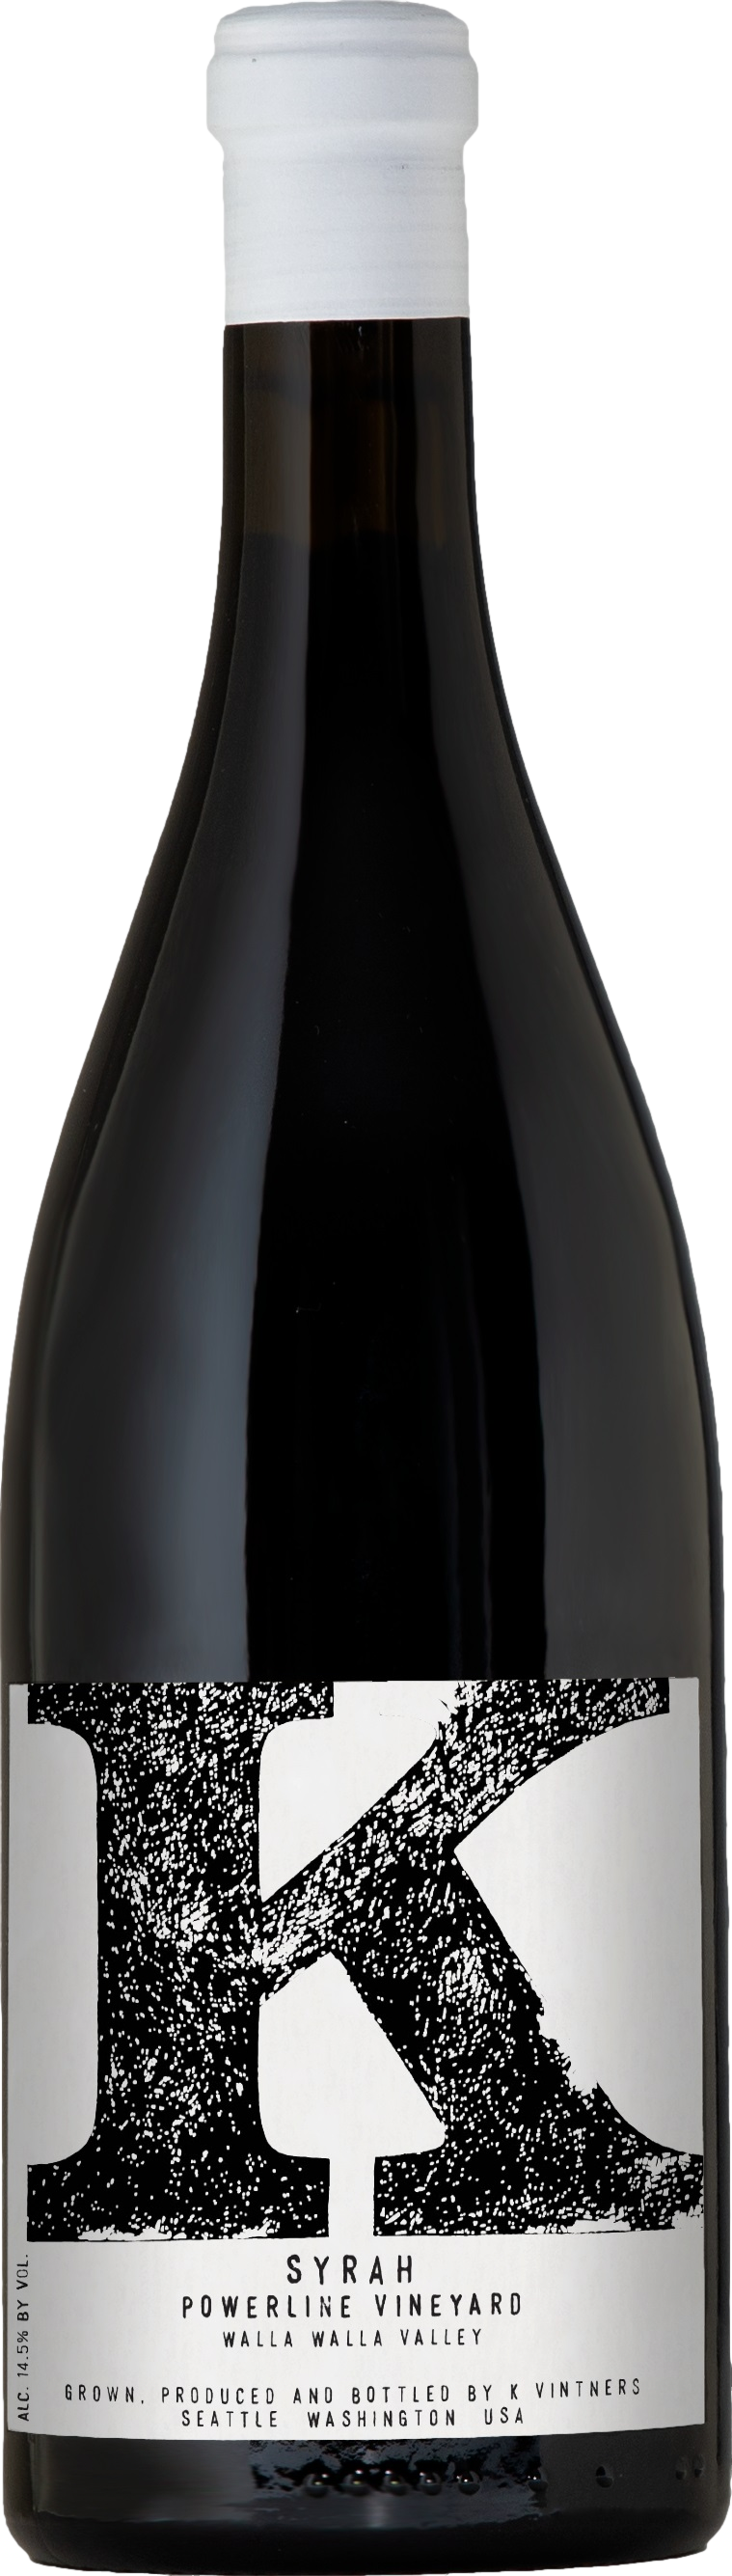 Charles Smith Substance Powerline Syrah 2019 Charles Smith 8wines DACH